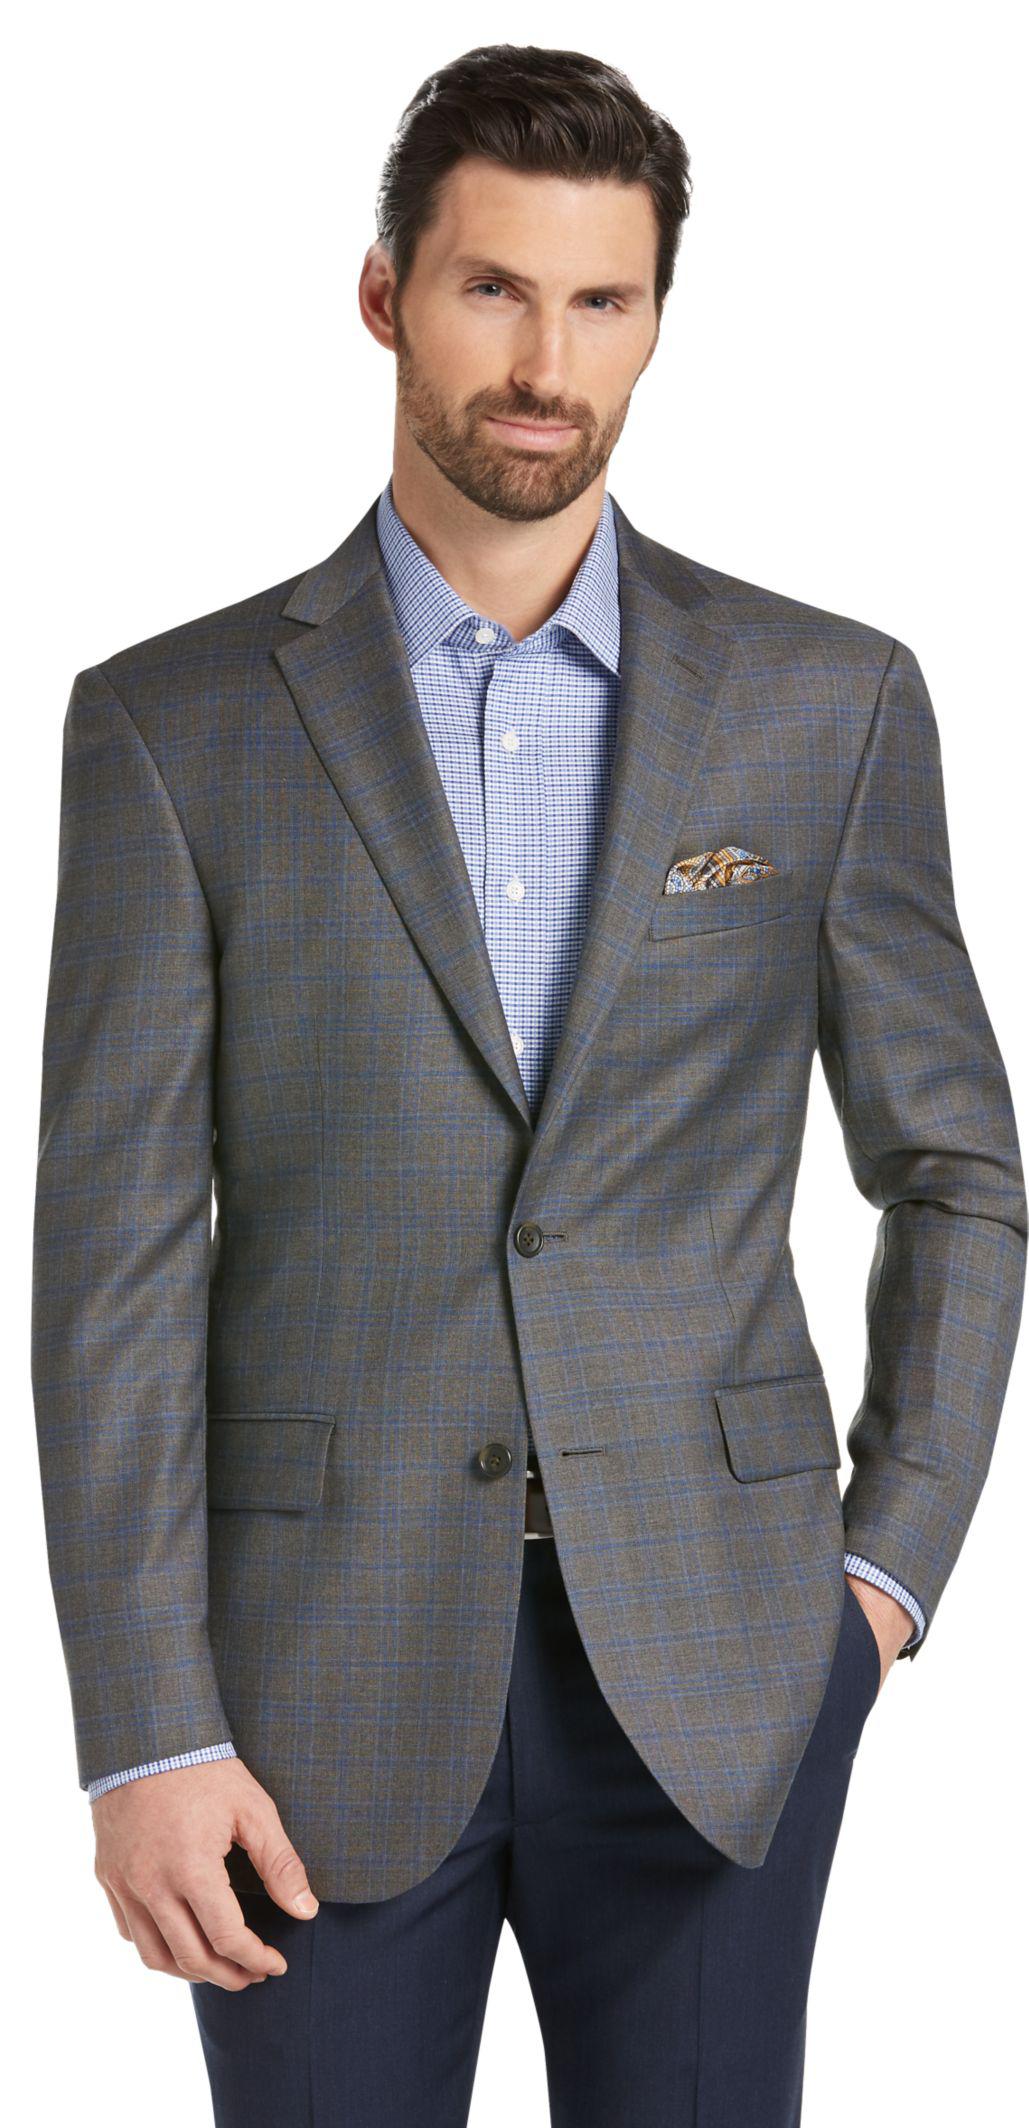 Lyst - Jos. A. Bank Reserve Collection Tailored Fit Plaid Sportcoat in ...